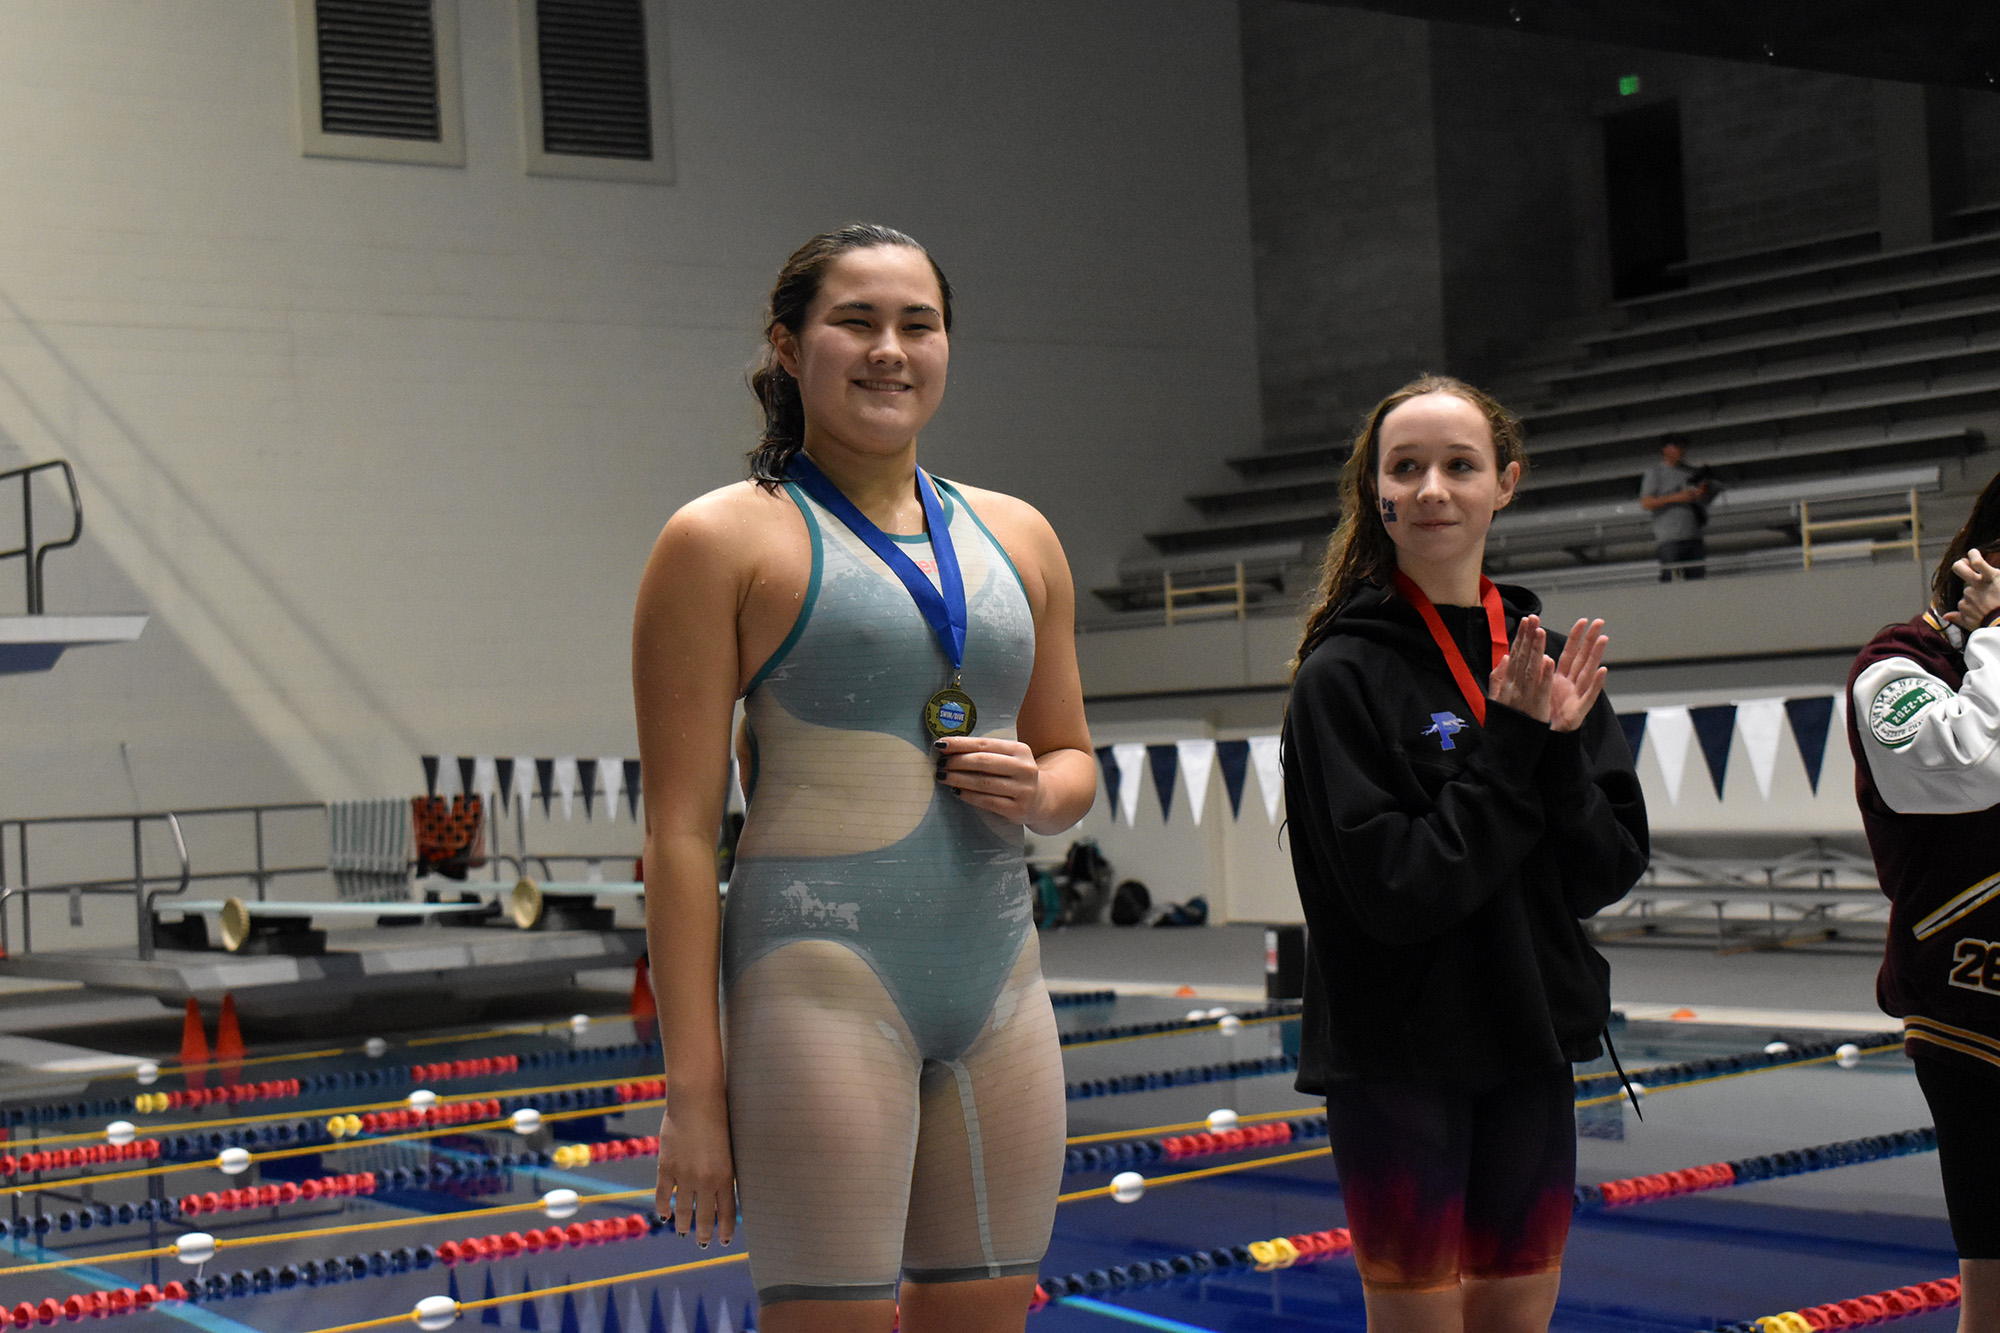 Rebecca Yamada of Ridgefield stands on the podium after receiving her medal for winning the 100-yard breaststroke at the Class 2A-1A state girls swimming championship at the King County Aquatic Center in Federal Way on Saturday, Nov. 11, 2023.